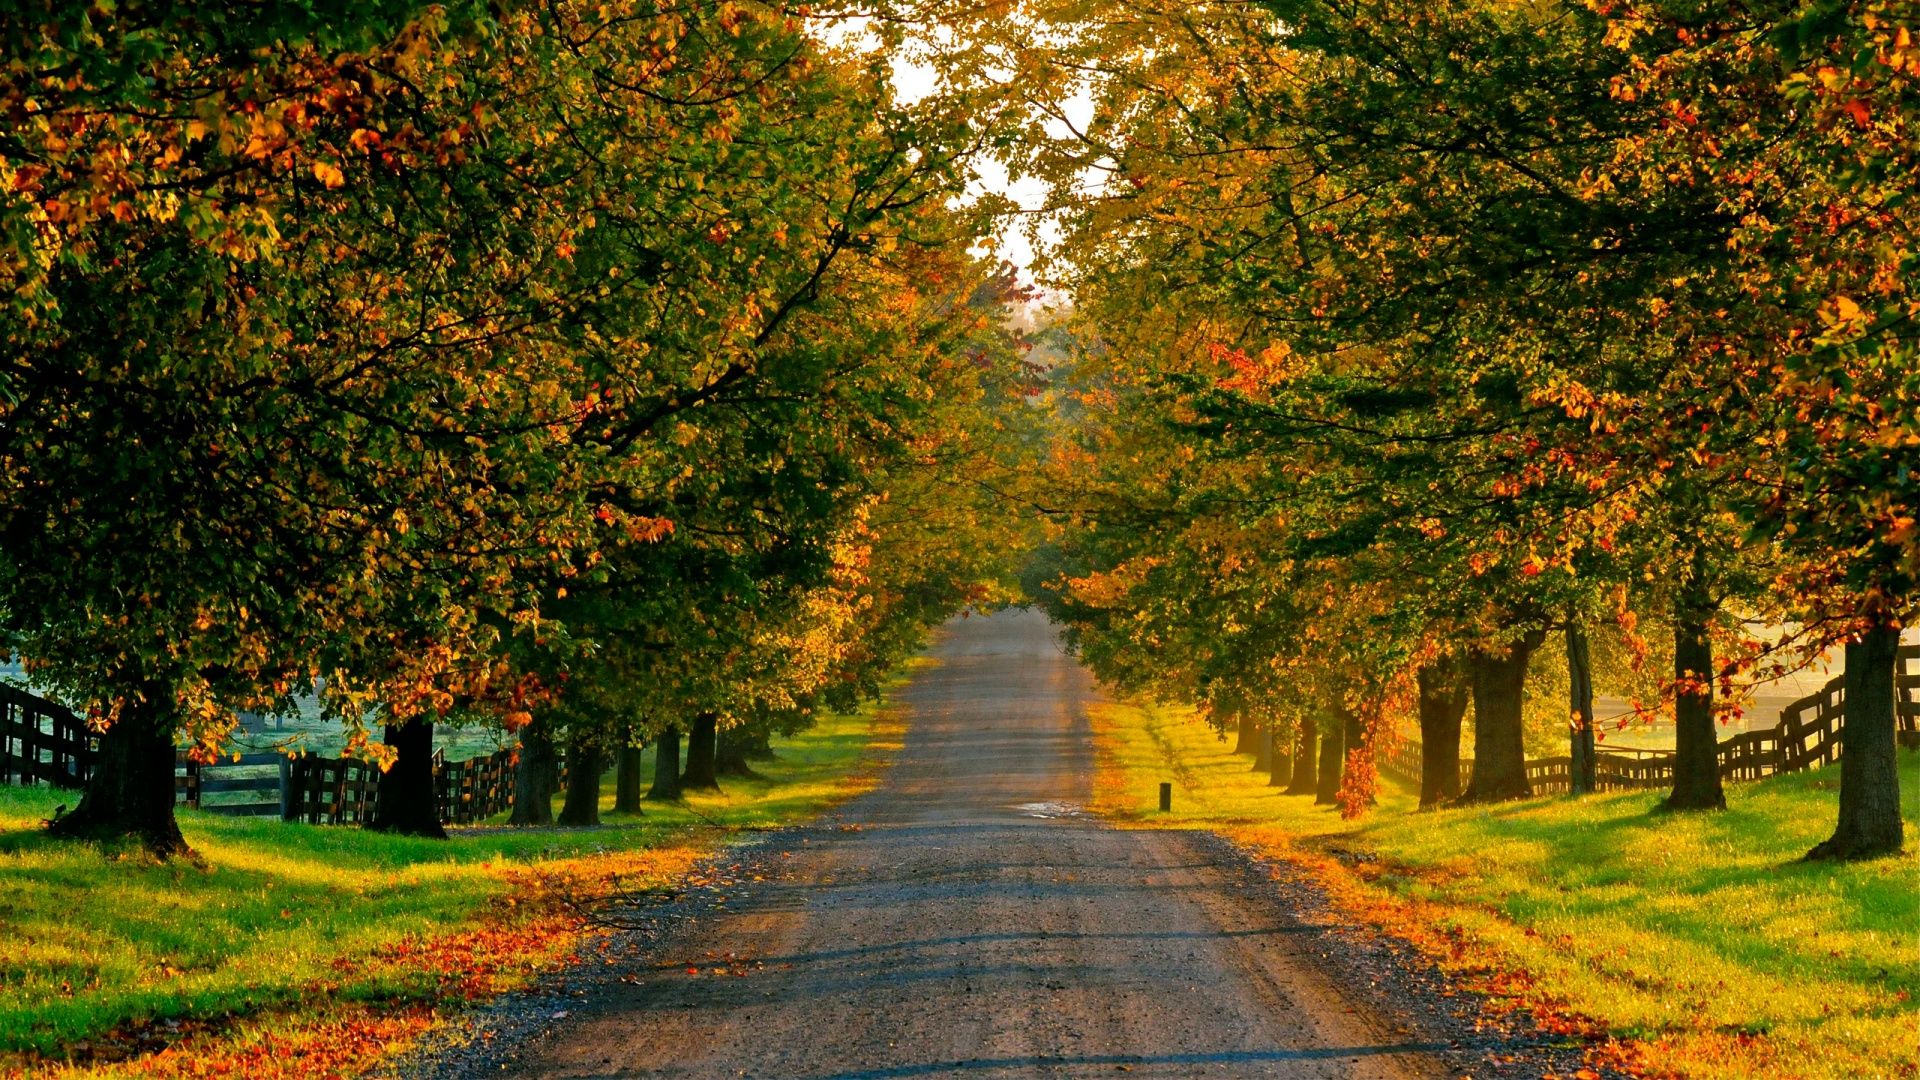 Autumn road. Countryside wallpaper, English countryside landscape, Country roads